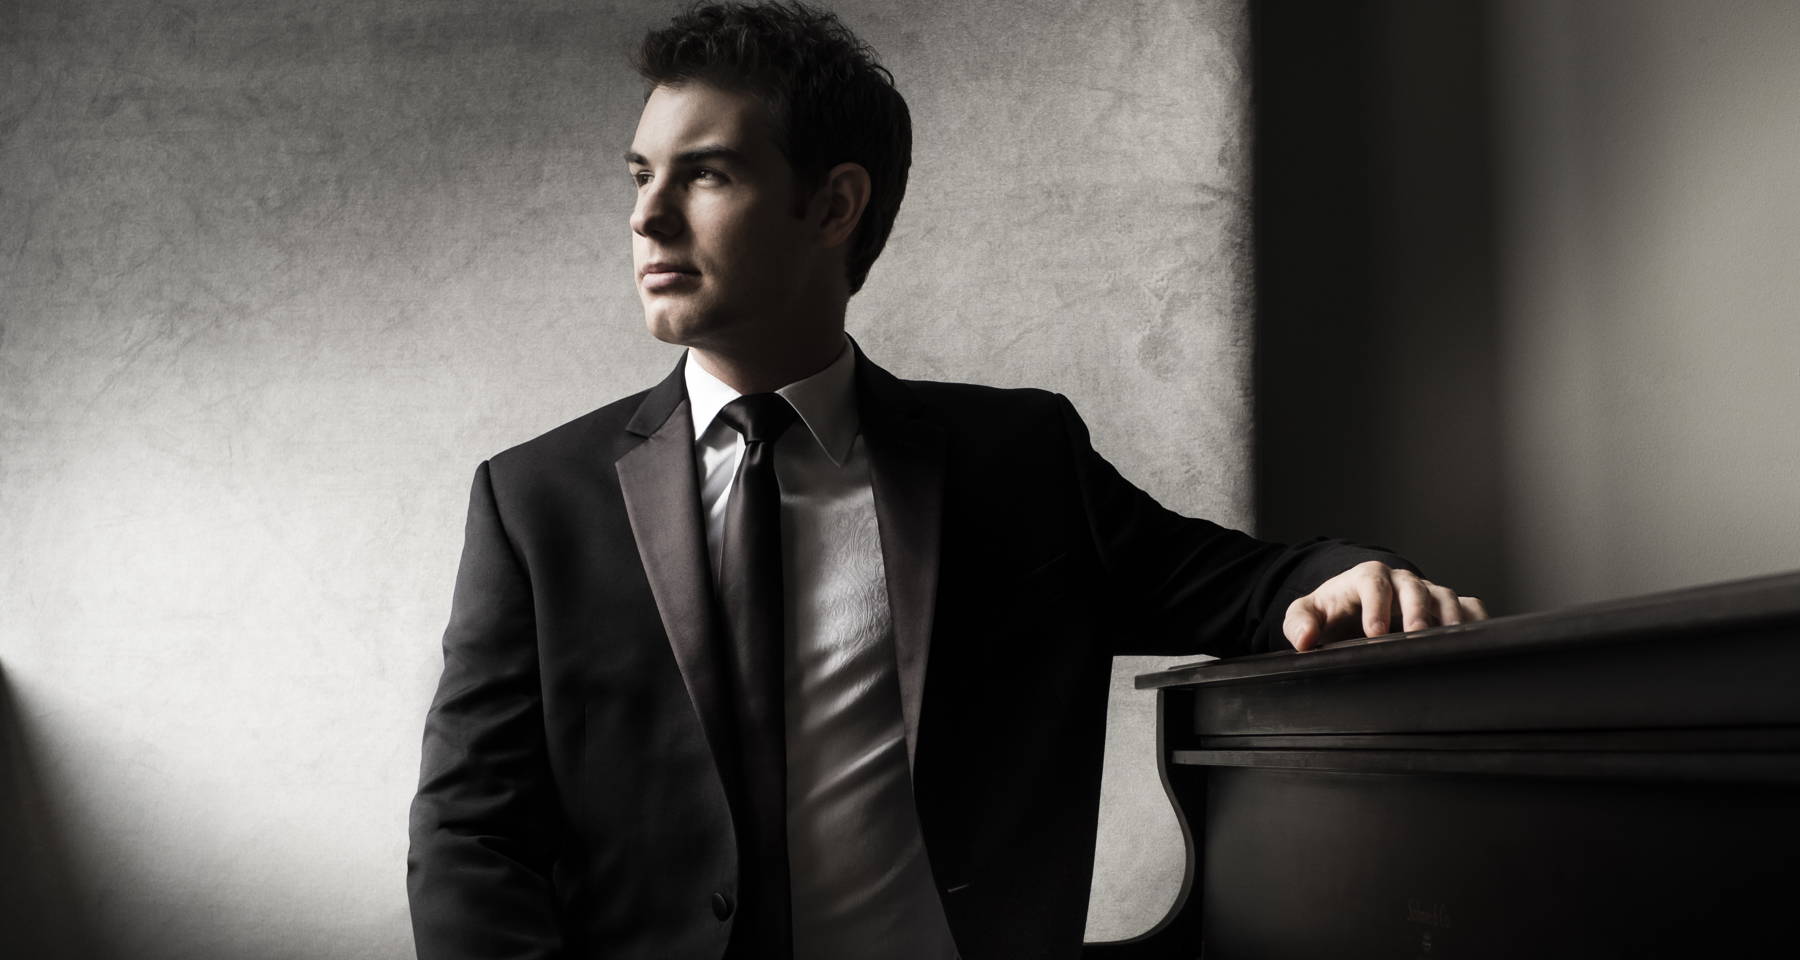 This Week from Guarneri Hall: "The Wanderer" with Pianist Drew Petersen